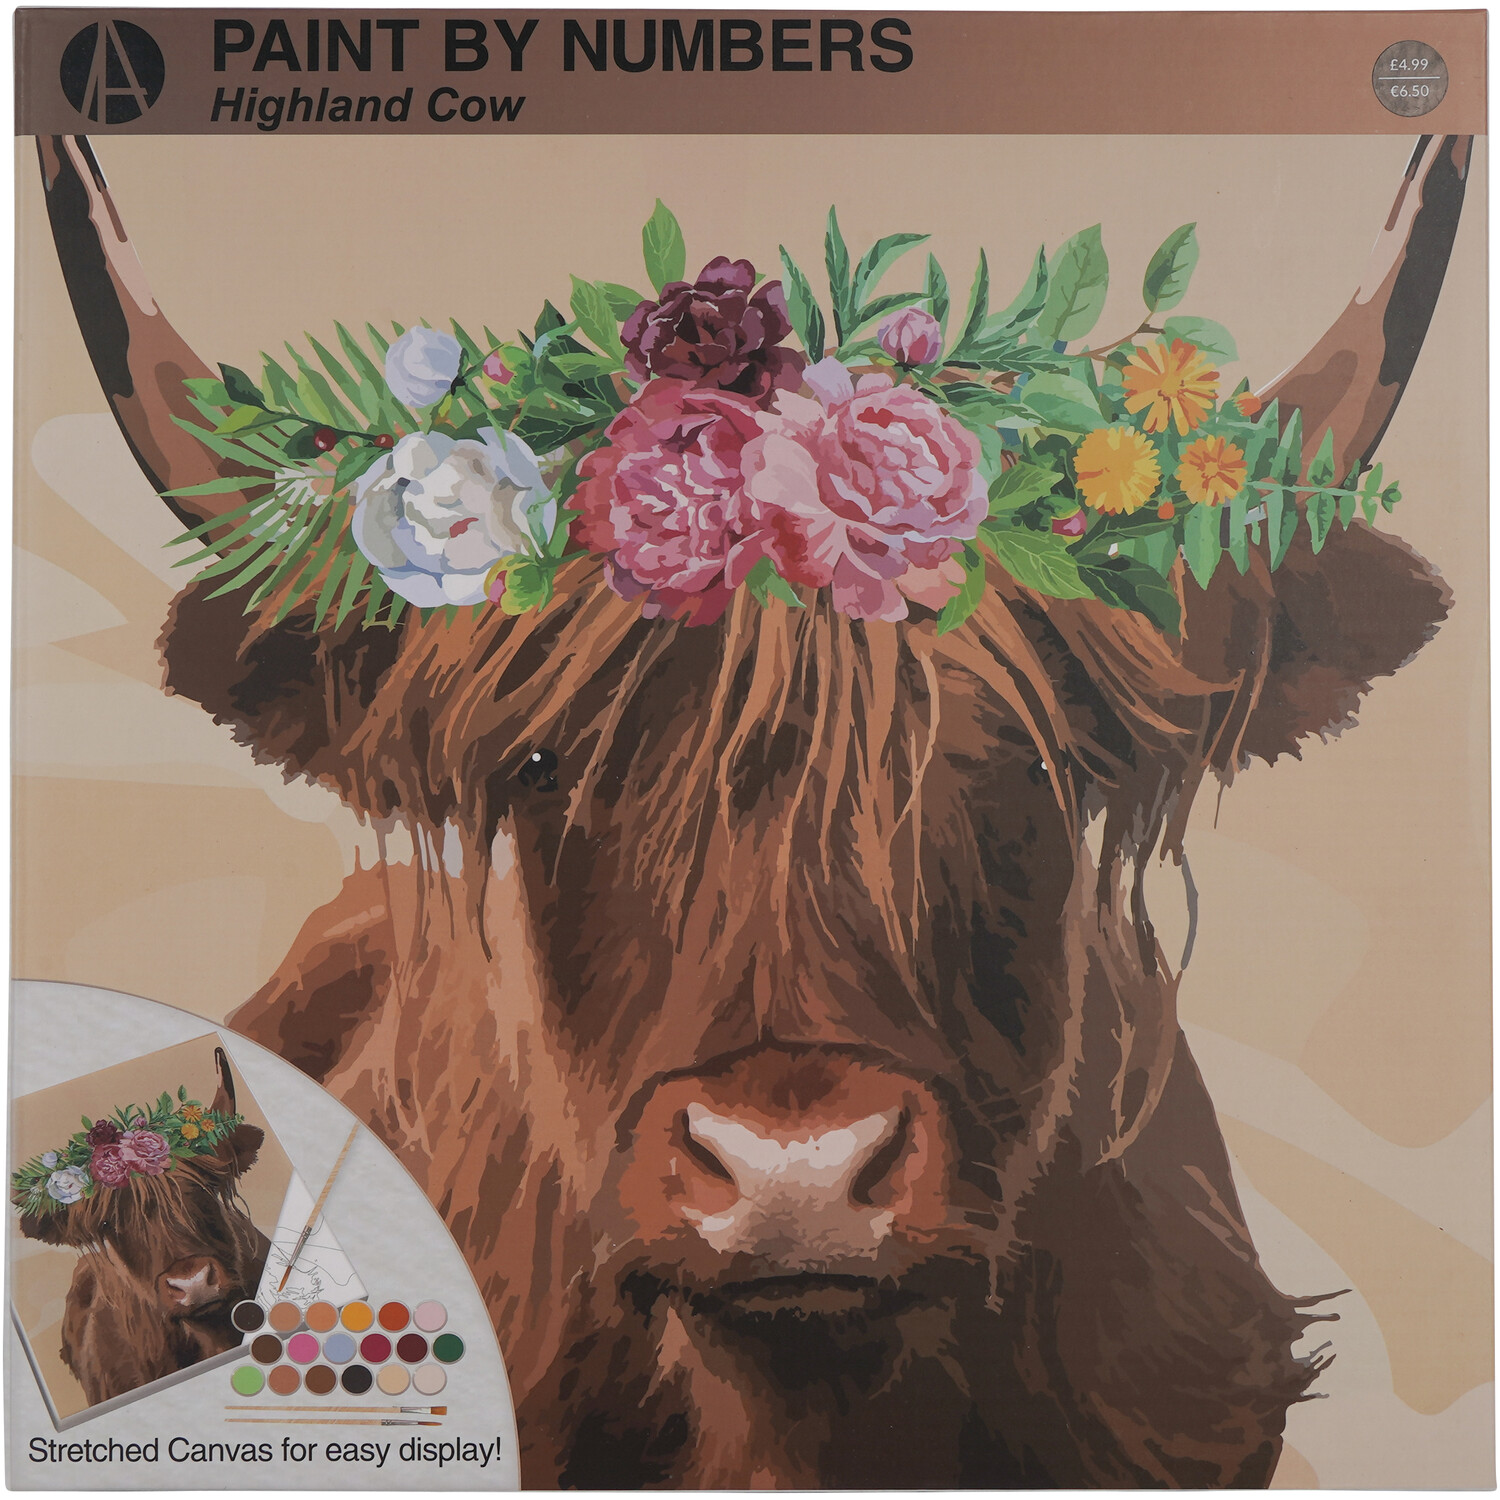 Art Studio Paint Your Own Highland Cow Kit Image 1